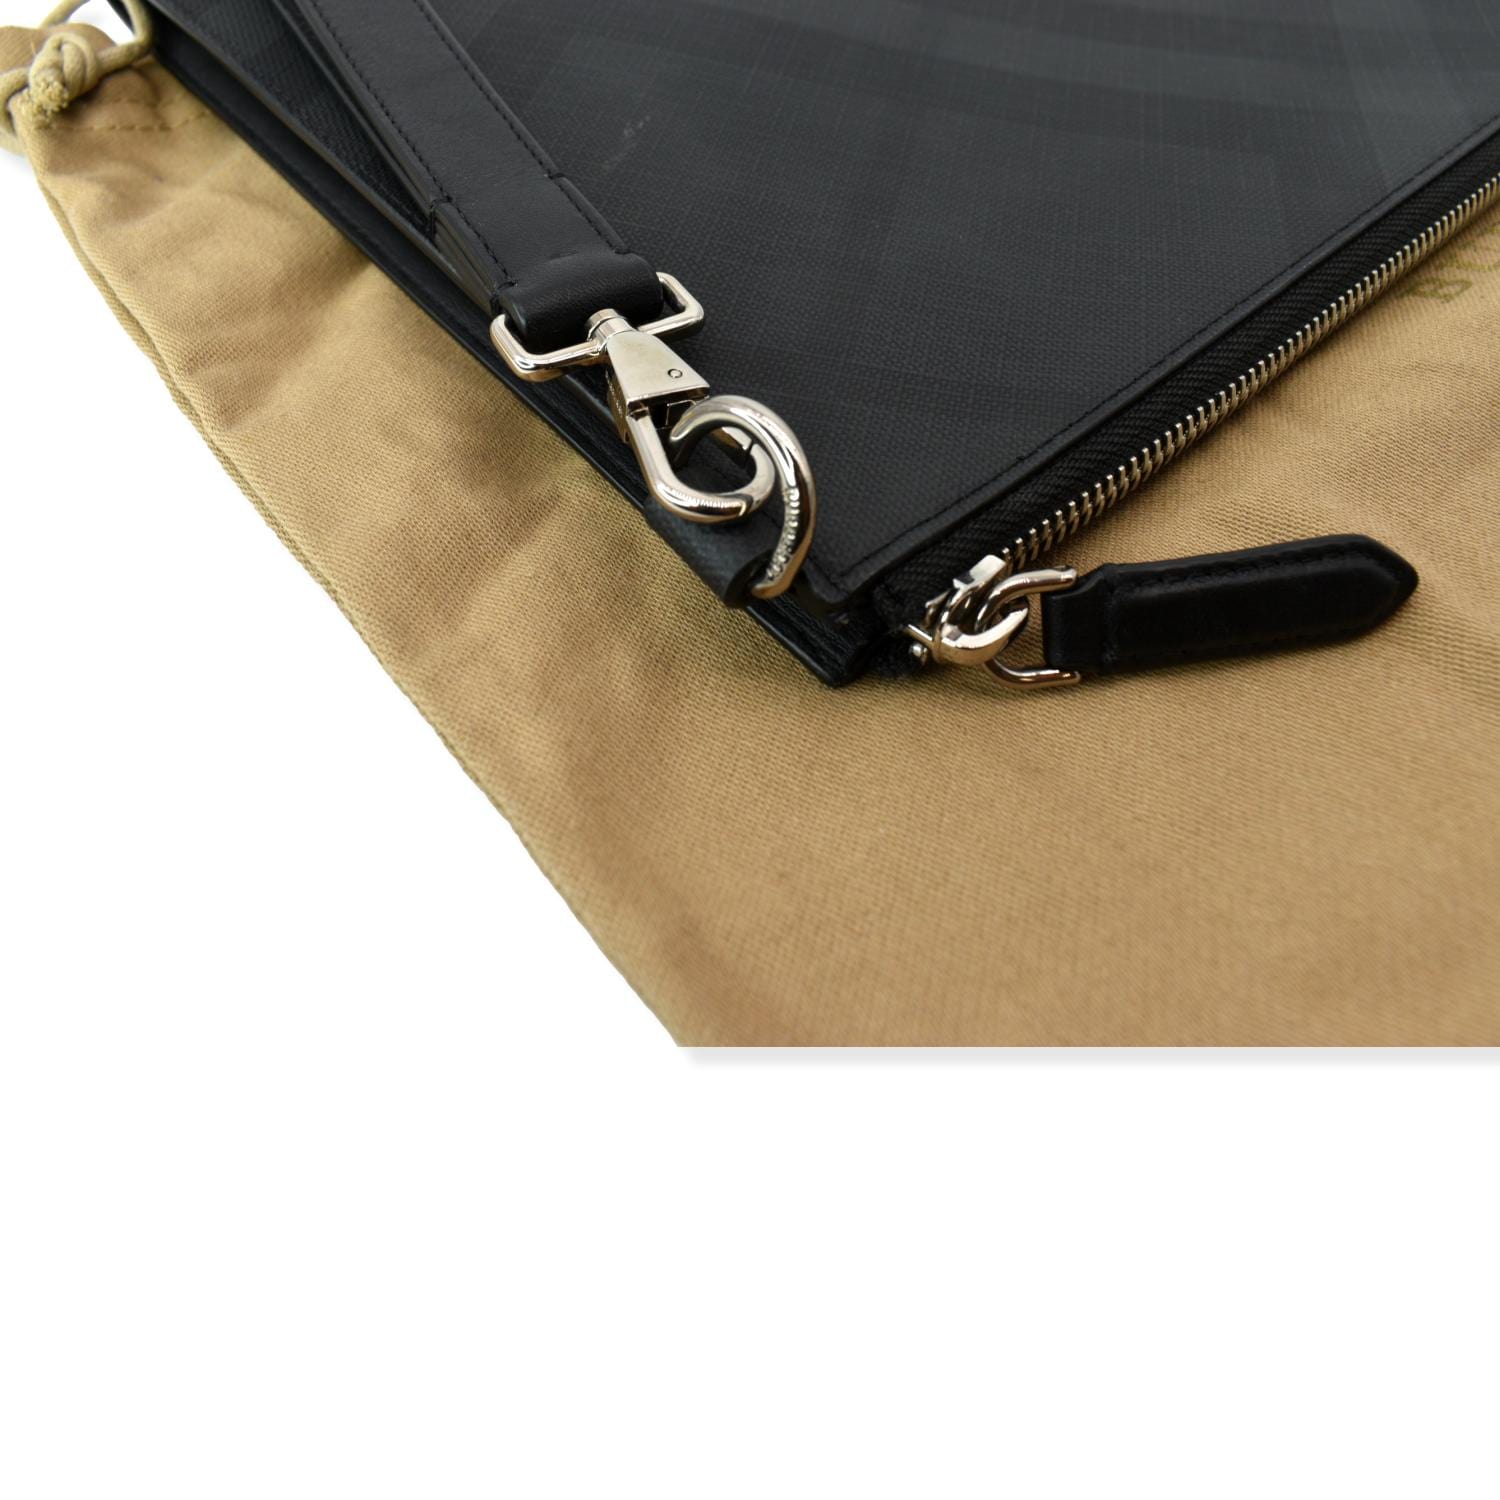 Burberry Leather Zipped Envelope With Tartan Pattern in Black for